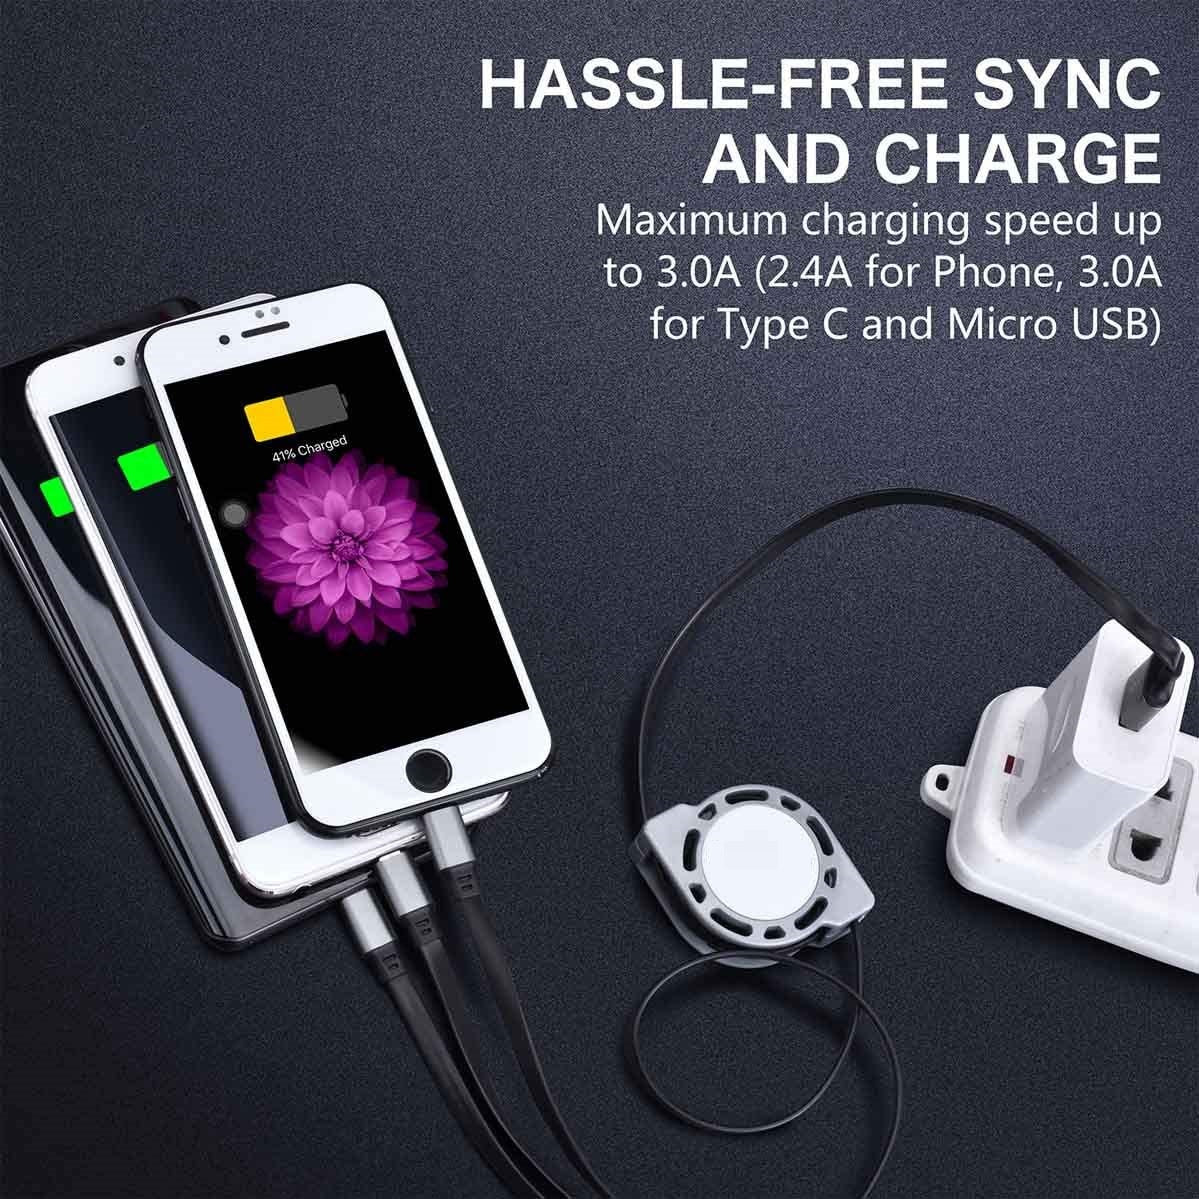 3 in 1 Retractable 3.0A Fast Charging Cable with iPhone, Type C & Micro USB Port